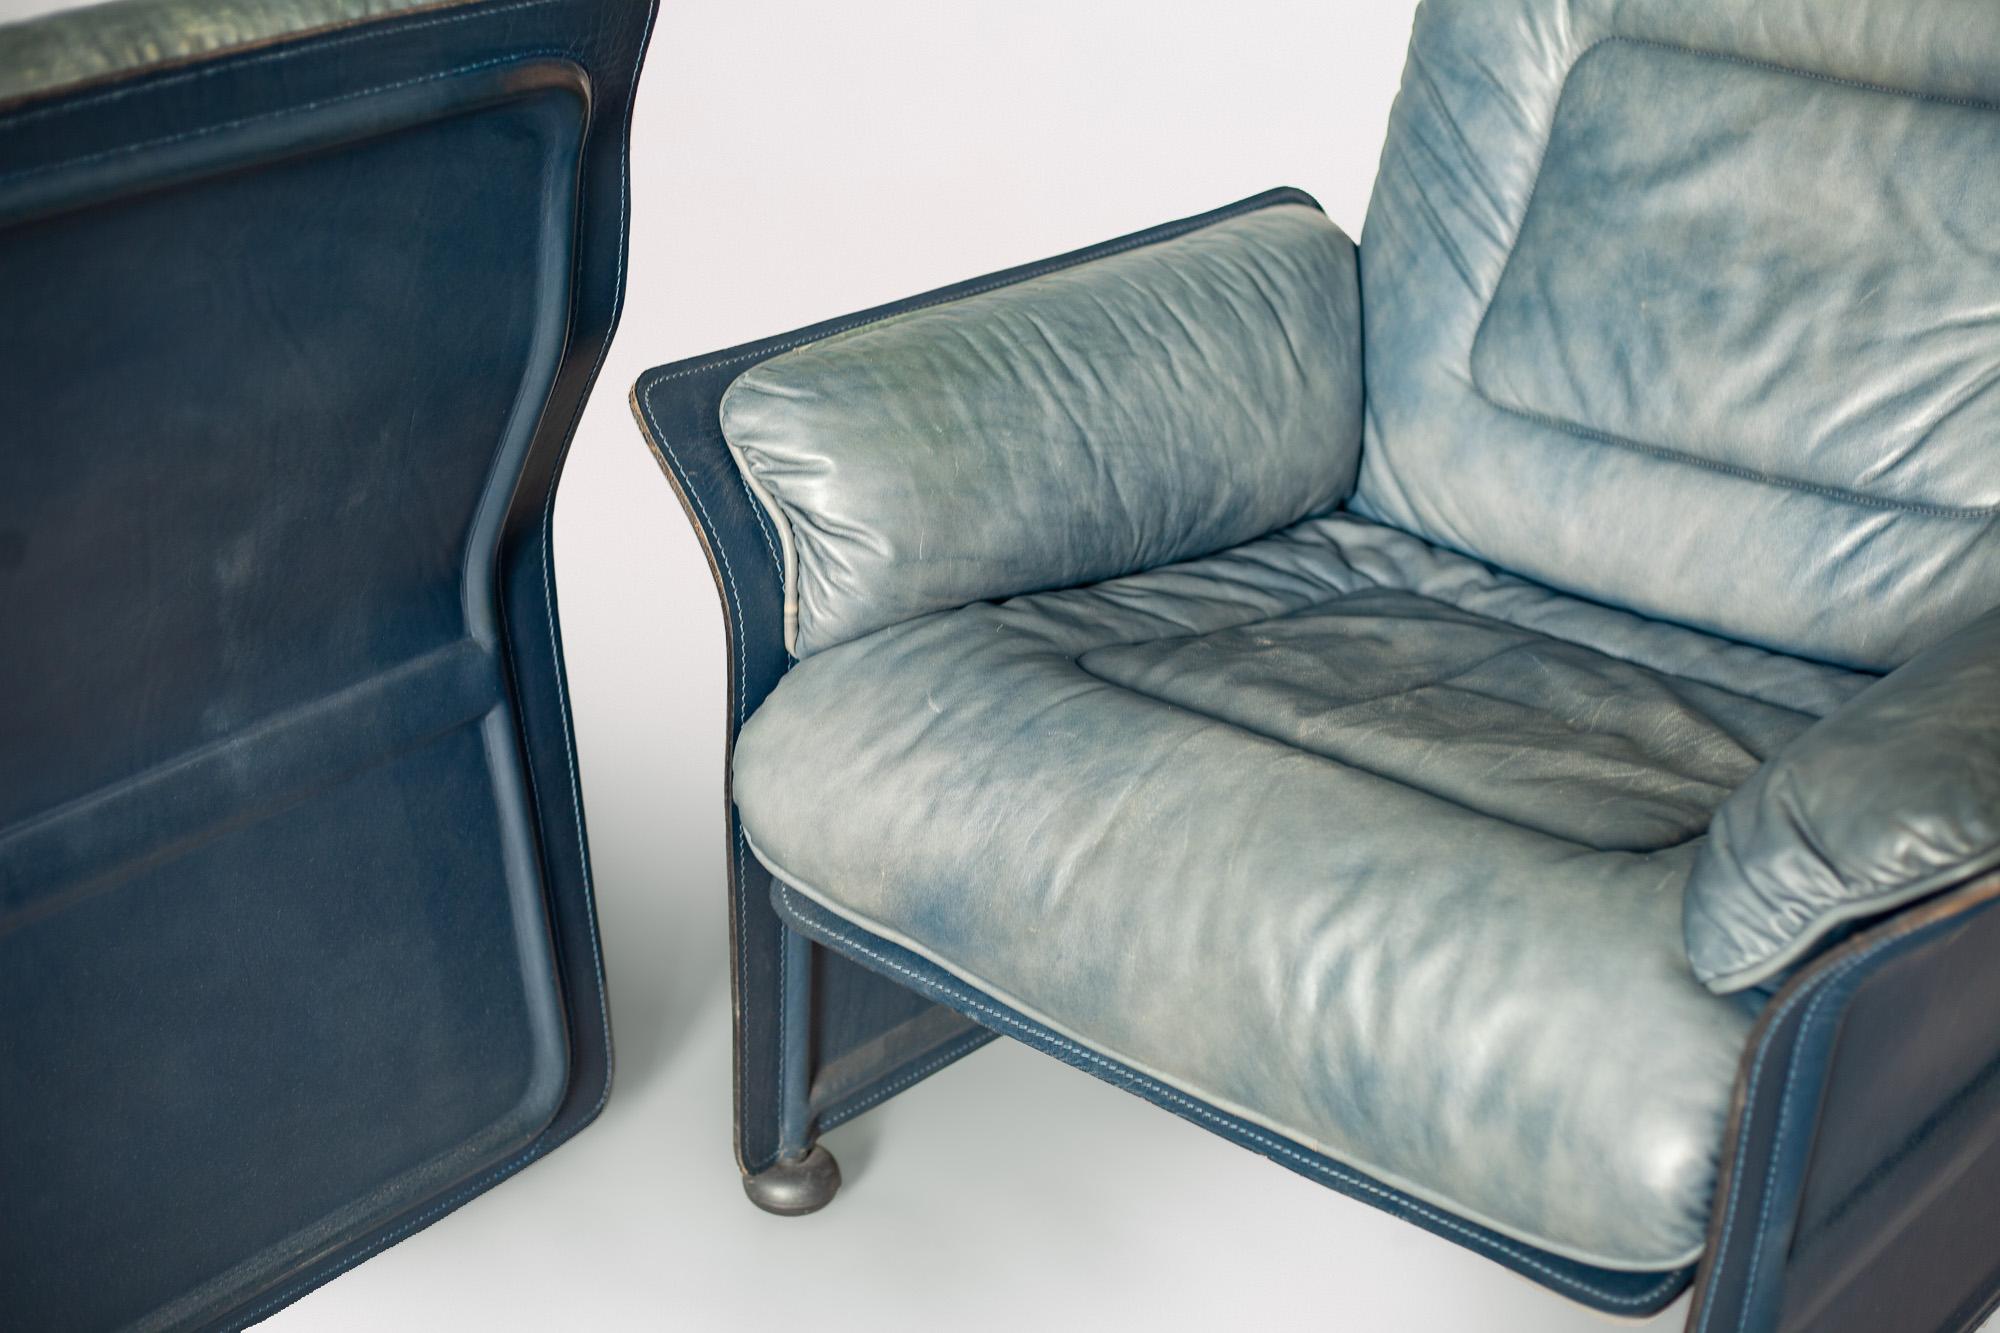 Blue leather club chairs designed by architect Guido Faleschini for i4 Mariani's Meteora collection, designed in the 1980s. Blue leather upholstered cushions on a saddle leather base. Made in Italy.